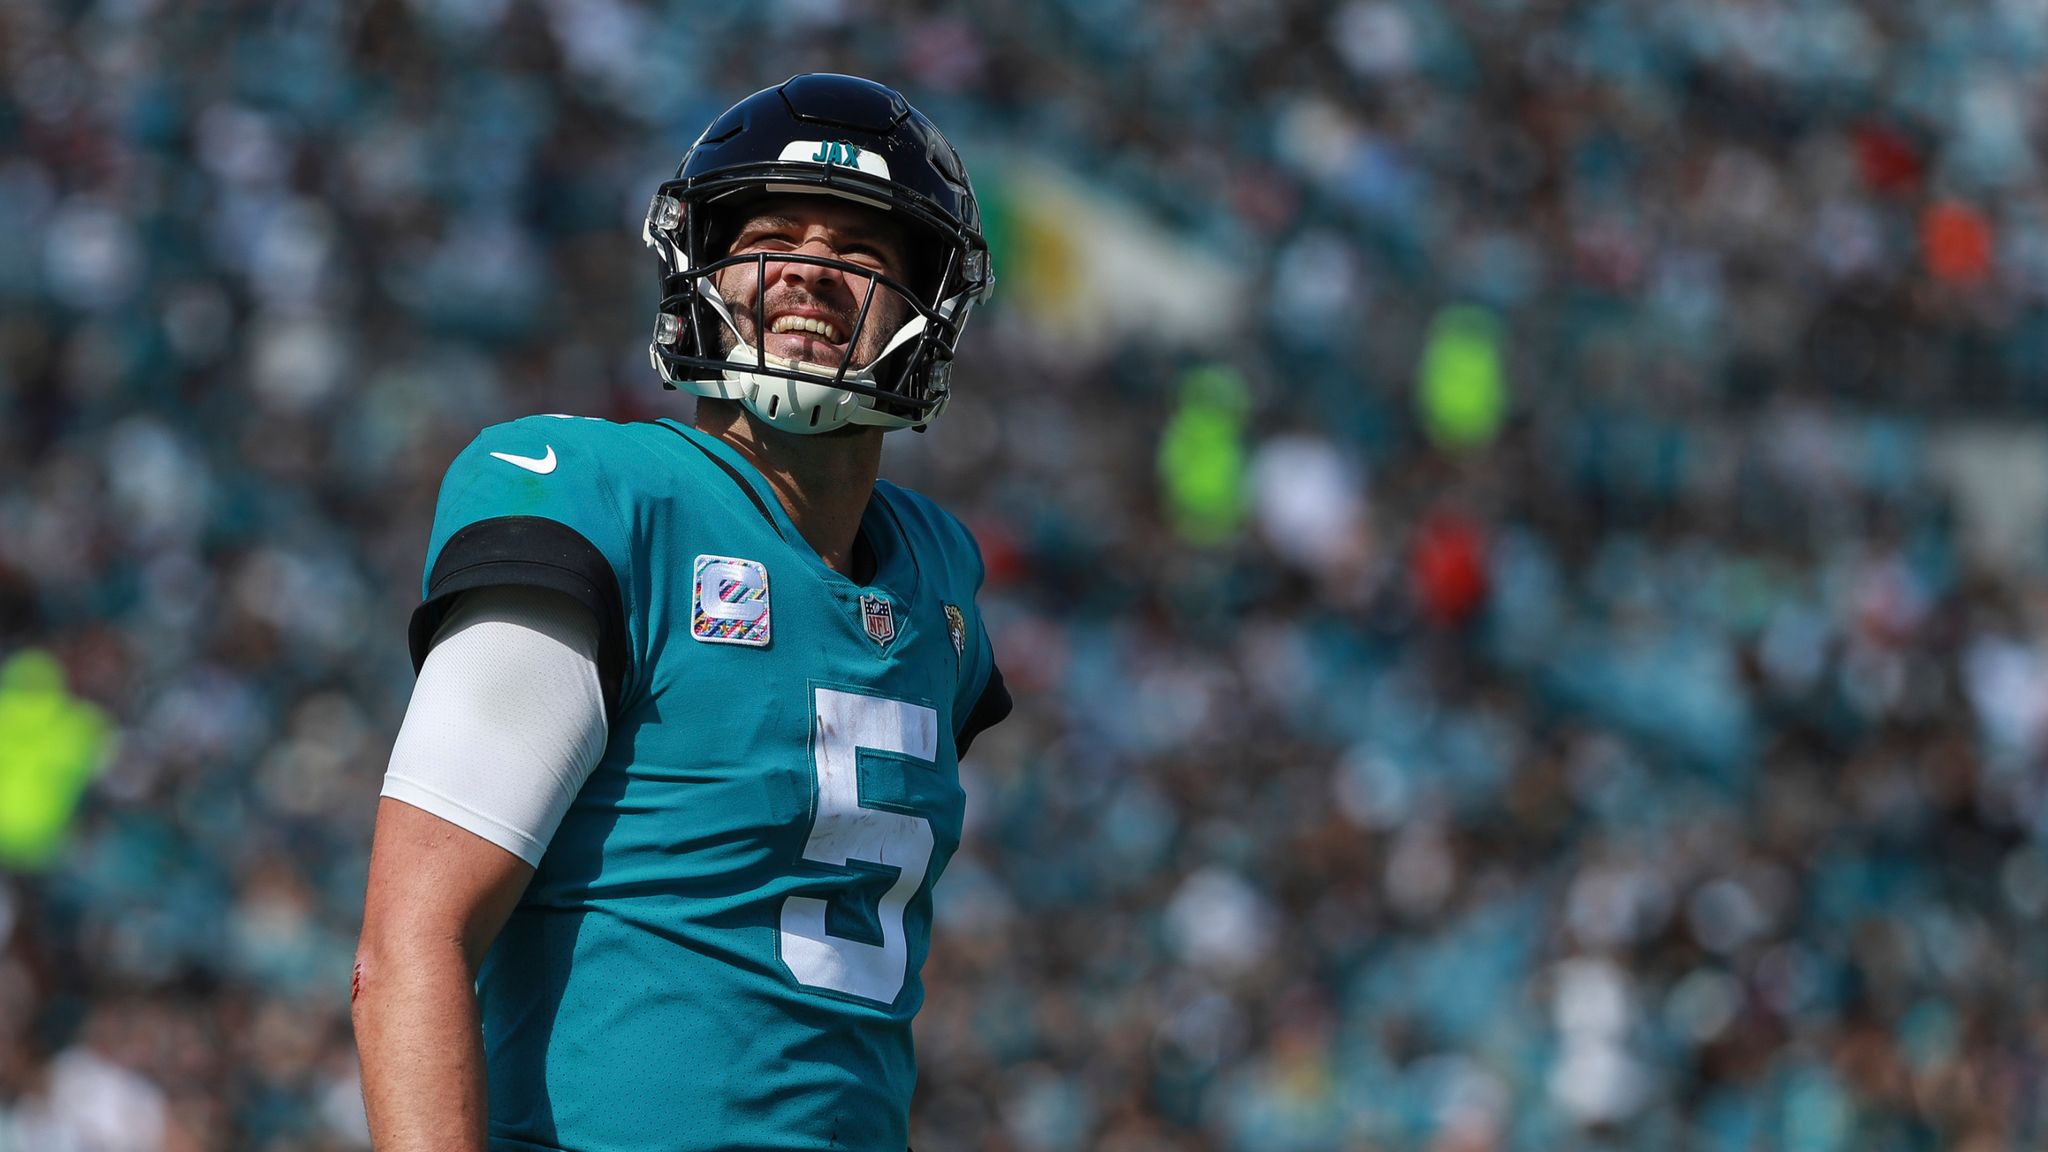 Blake Bortles Gets Benched And The Jaguars Are Tumbling